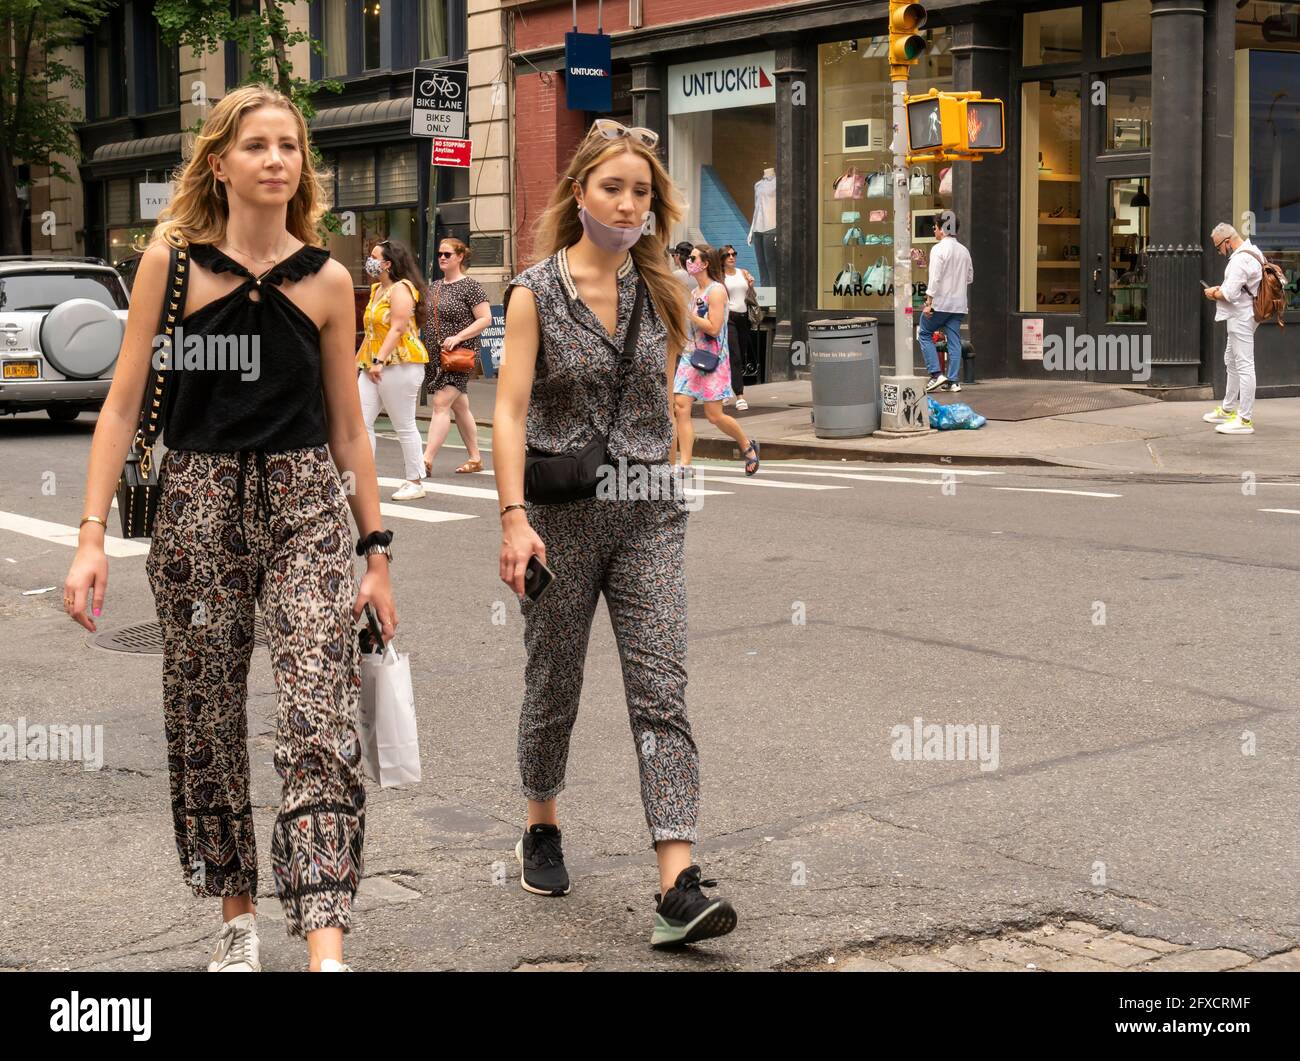 Mask-less people in the Soho neighborhood in New York on Saturday, May 22, 2021. New York has relaxed mask mandates allowing most outdoor activities to be mask free as well as many indoor settings, with caveats. (© Richard B. Levine) Stock Photo